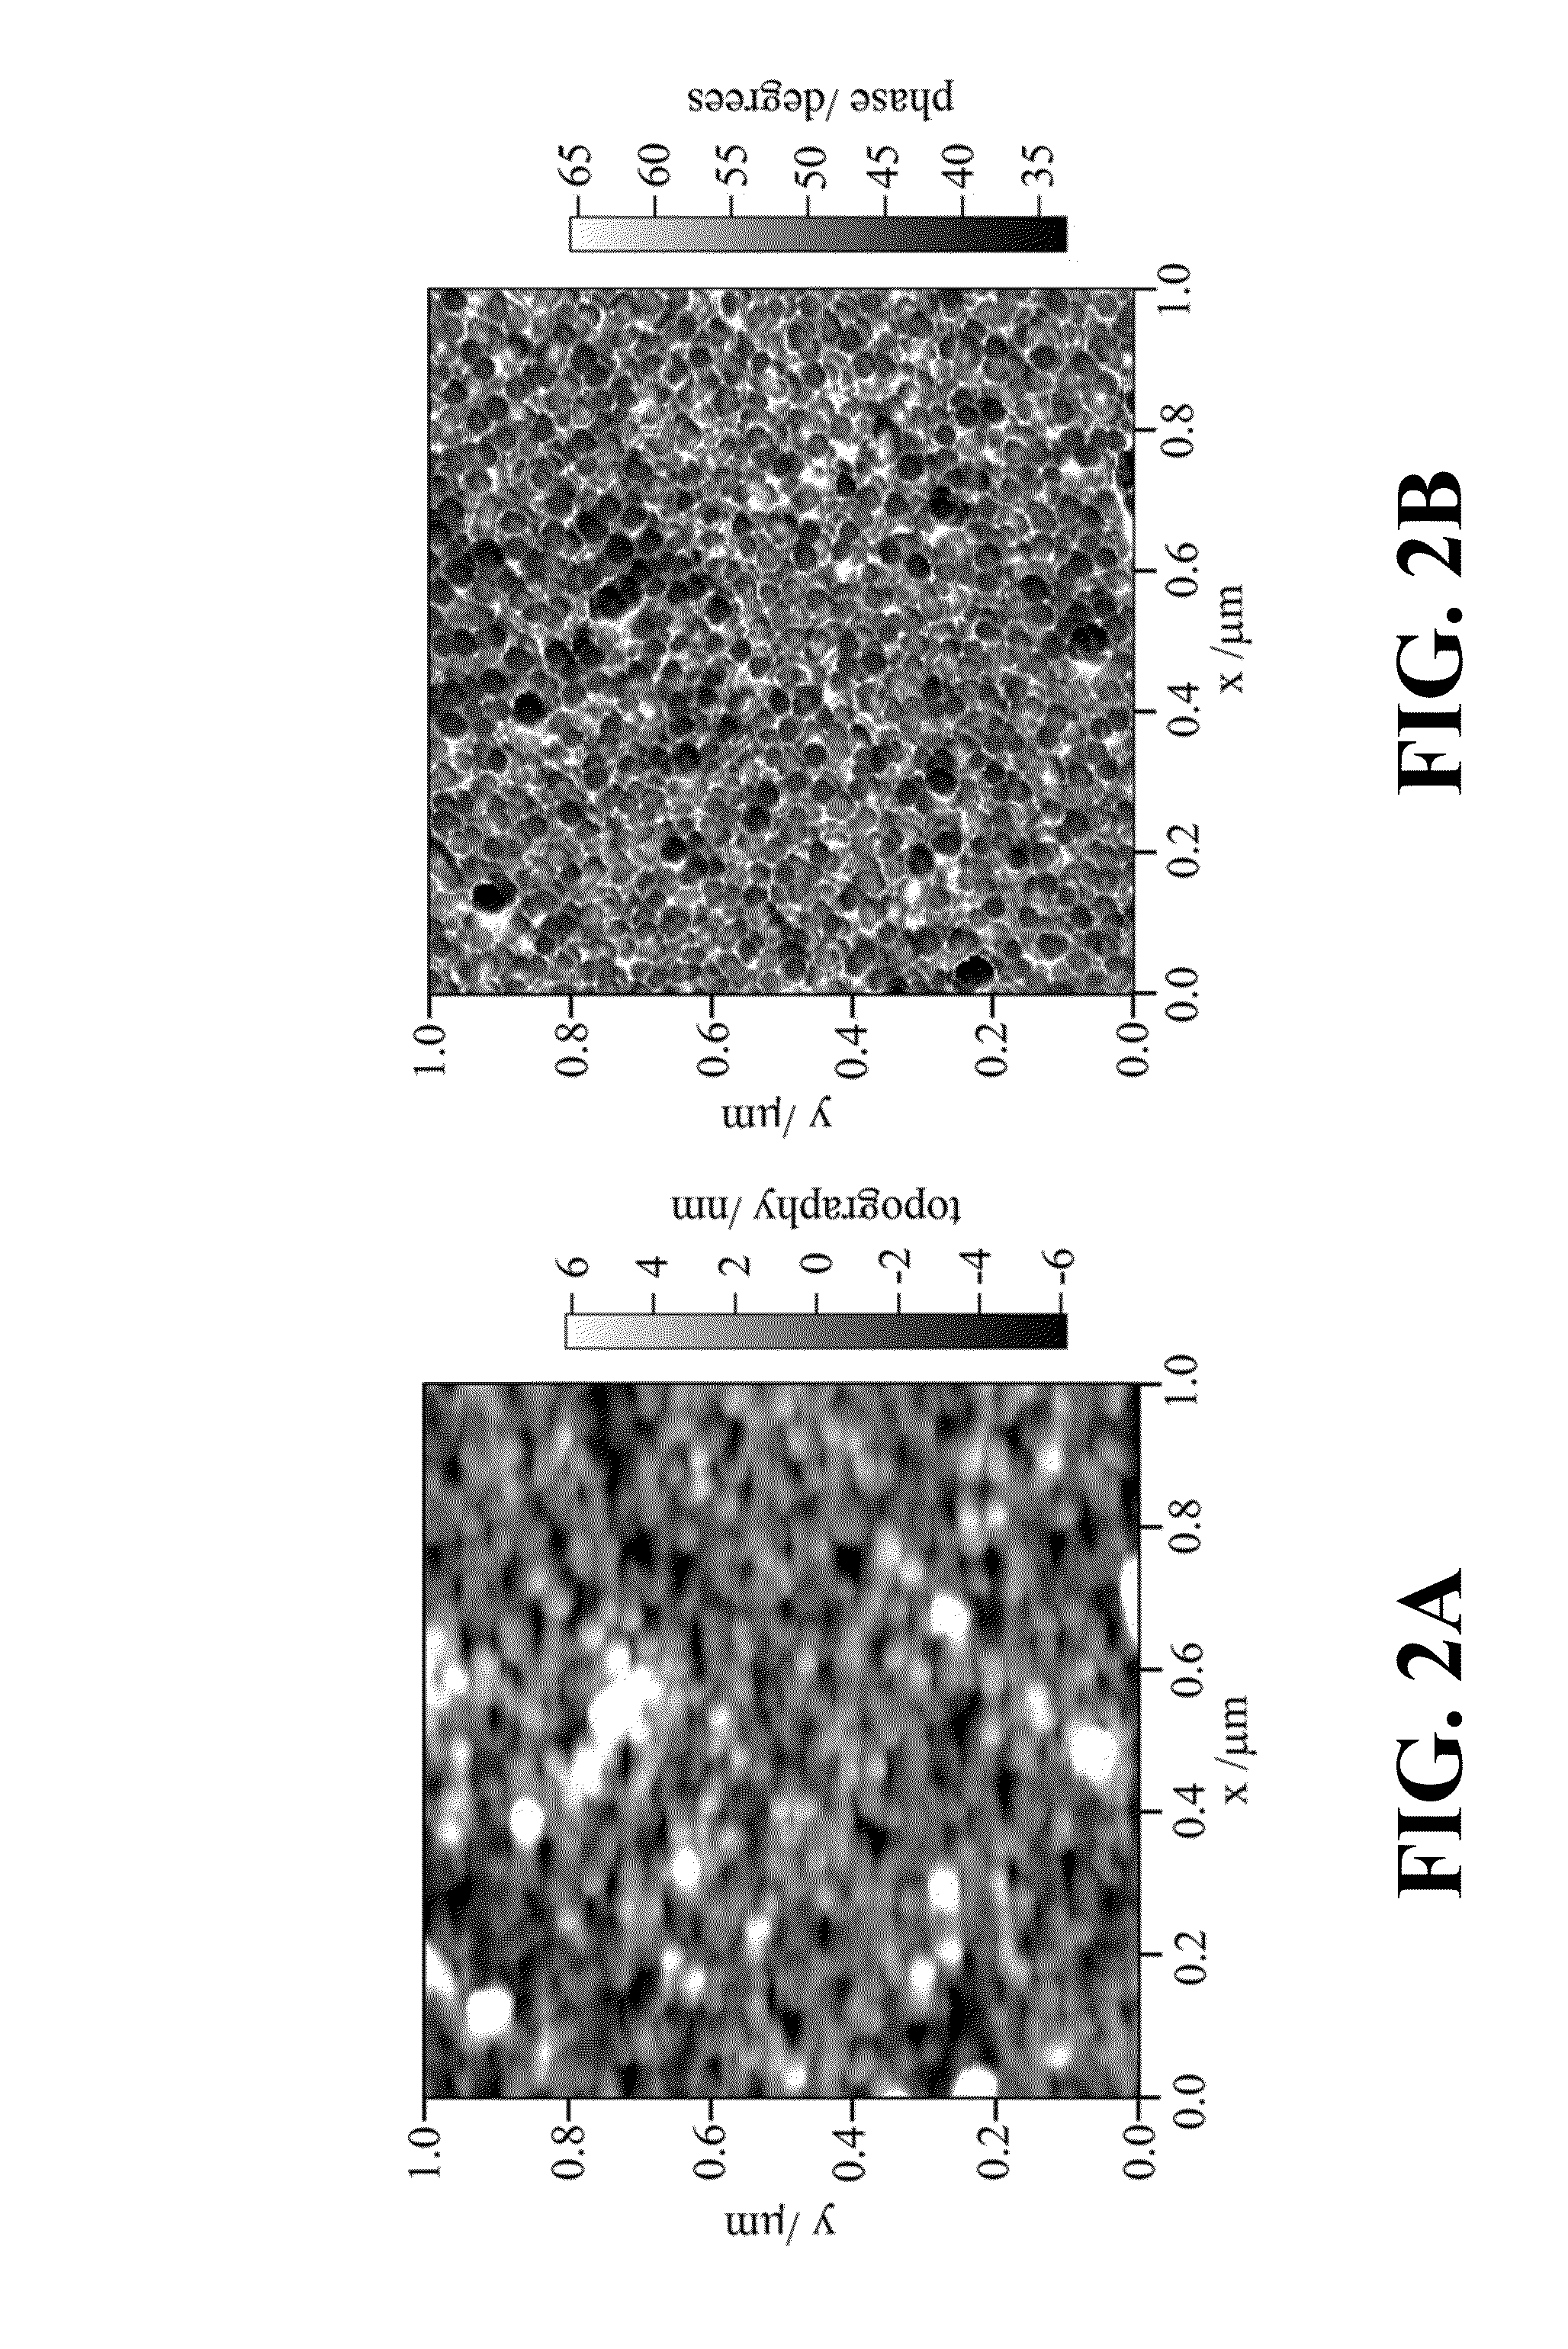 Methods for fabrication of substrates for surface enhanced Raman spectroscopy